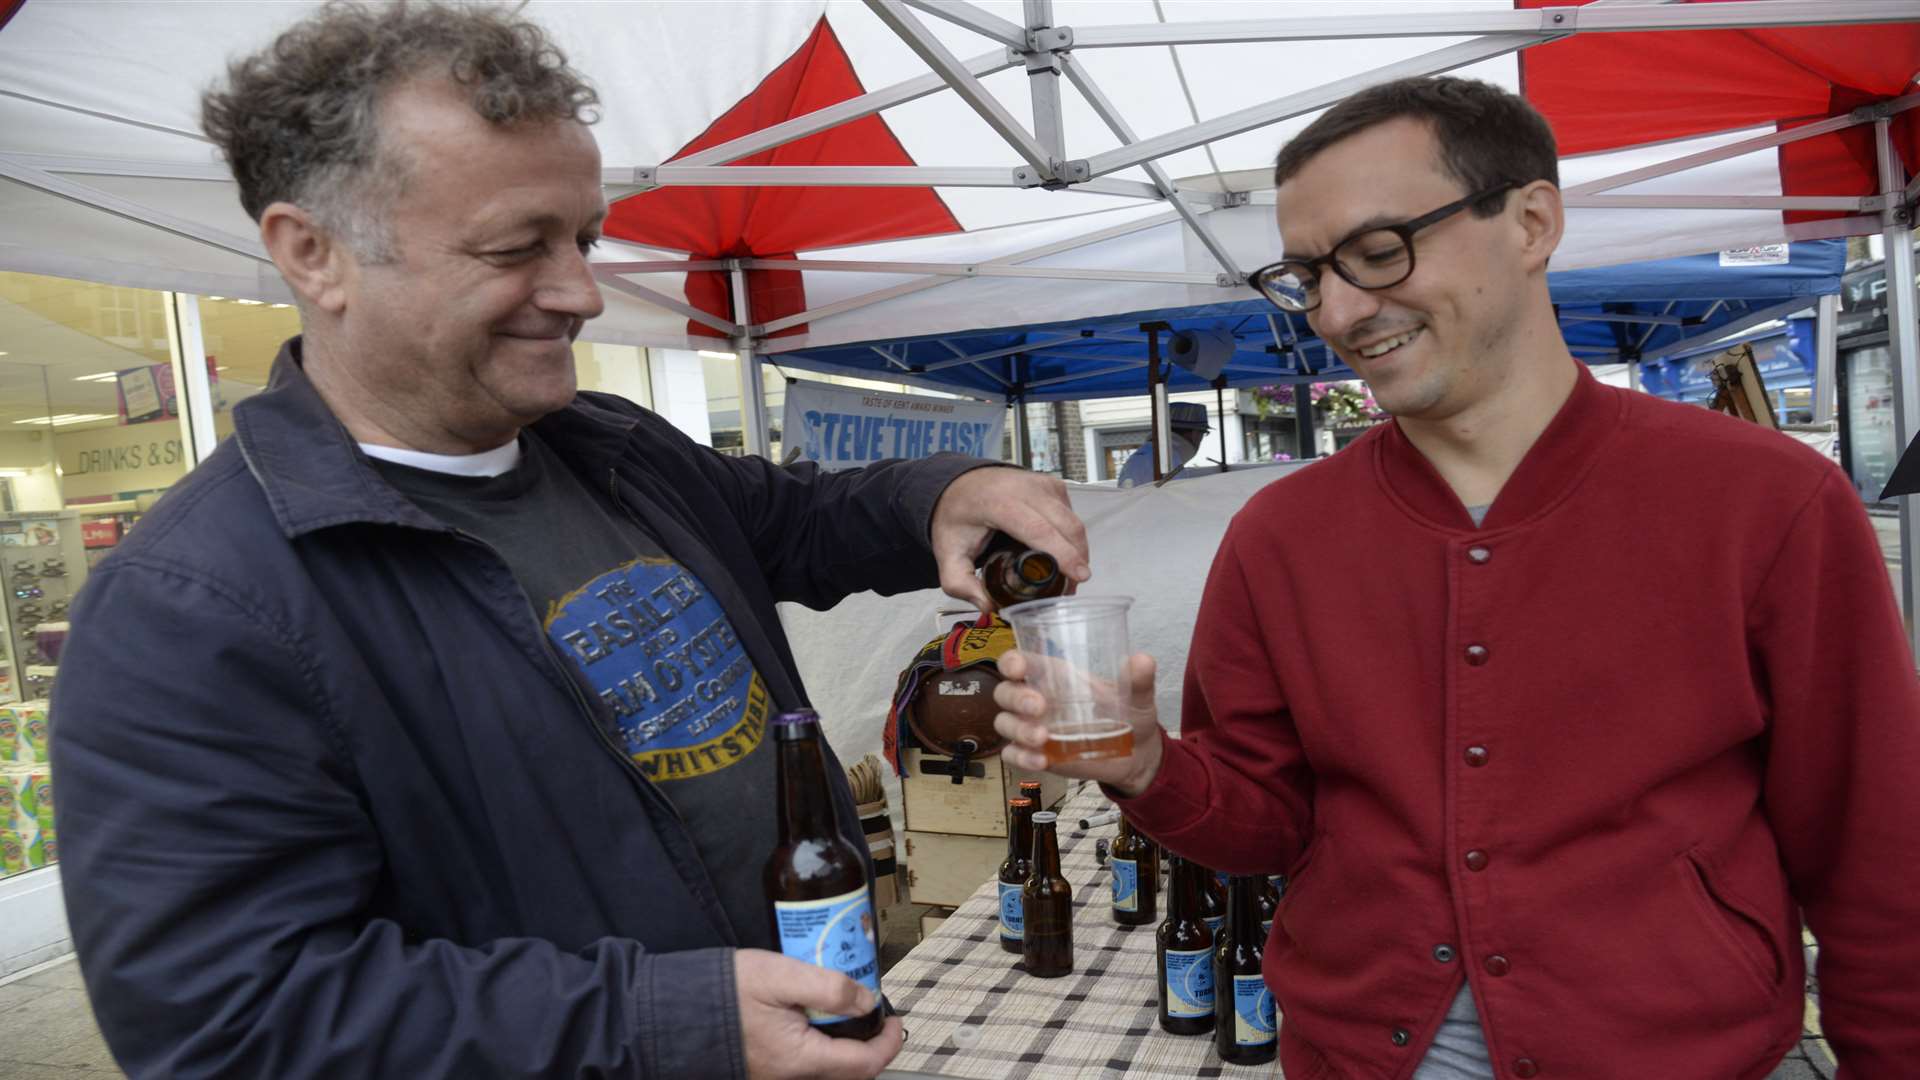 Martin Convery of Turnstone Brewery pours a sample of his beers for Rob Fordham at the Faversham Food Festival on Saturday.